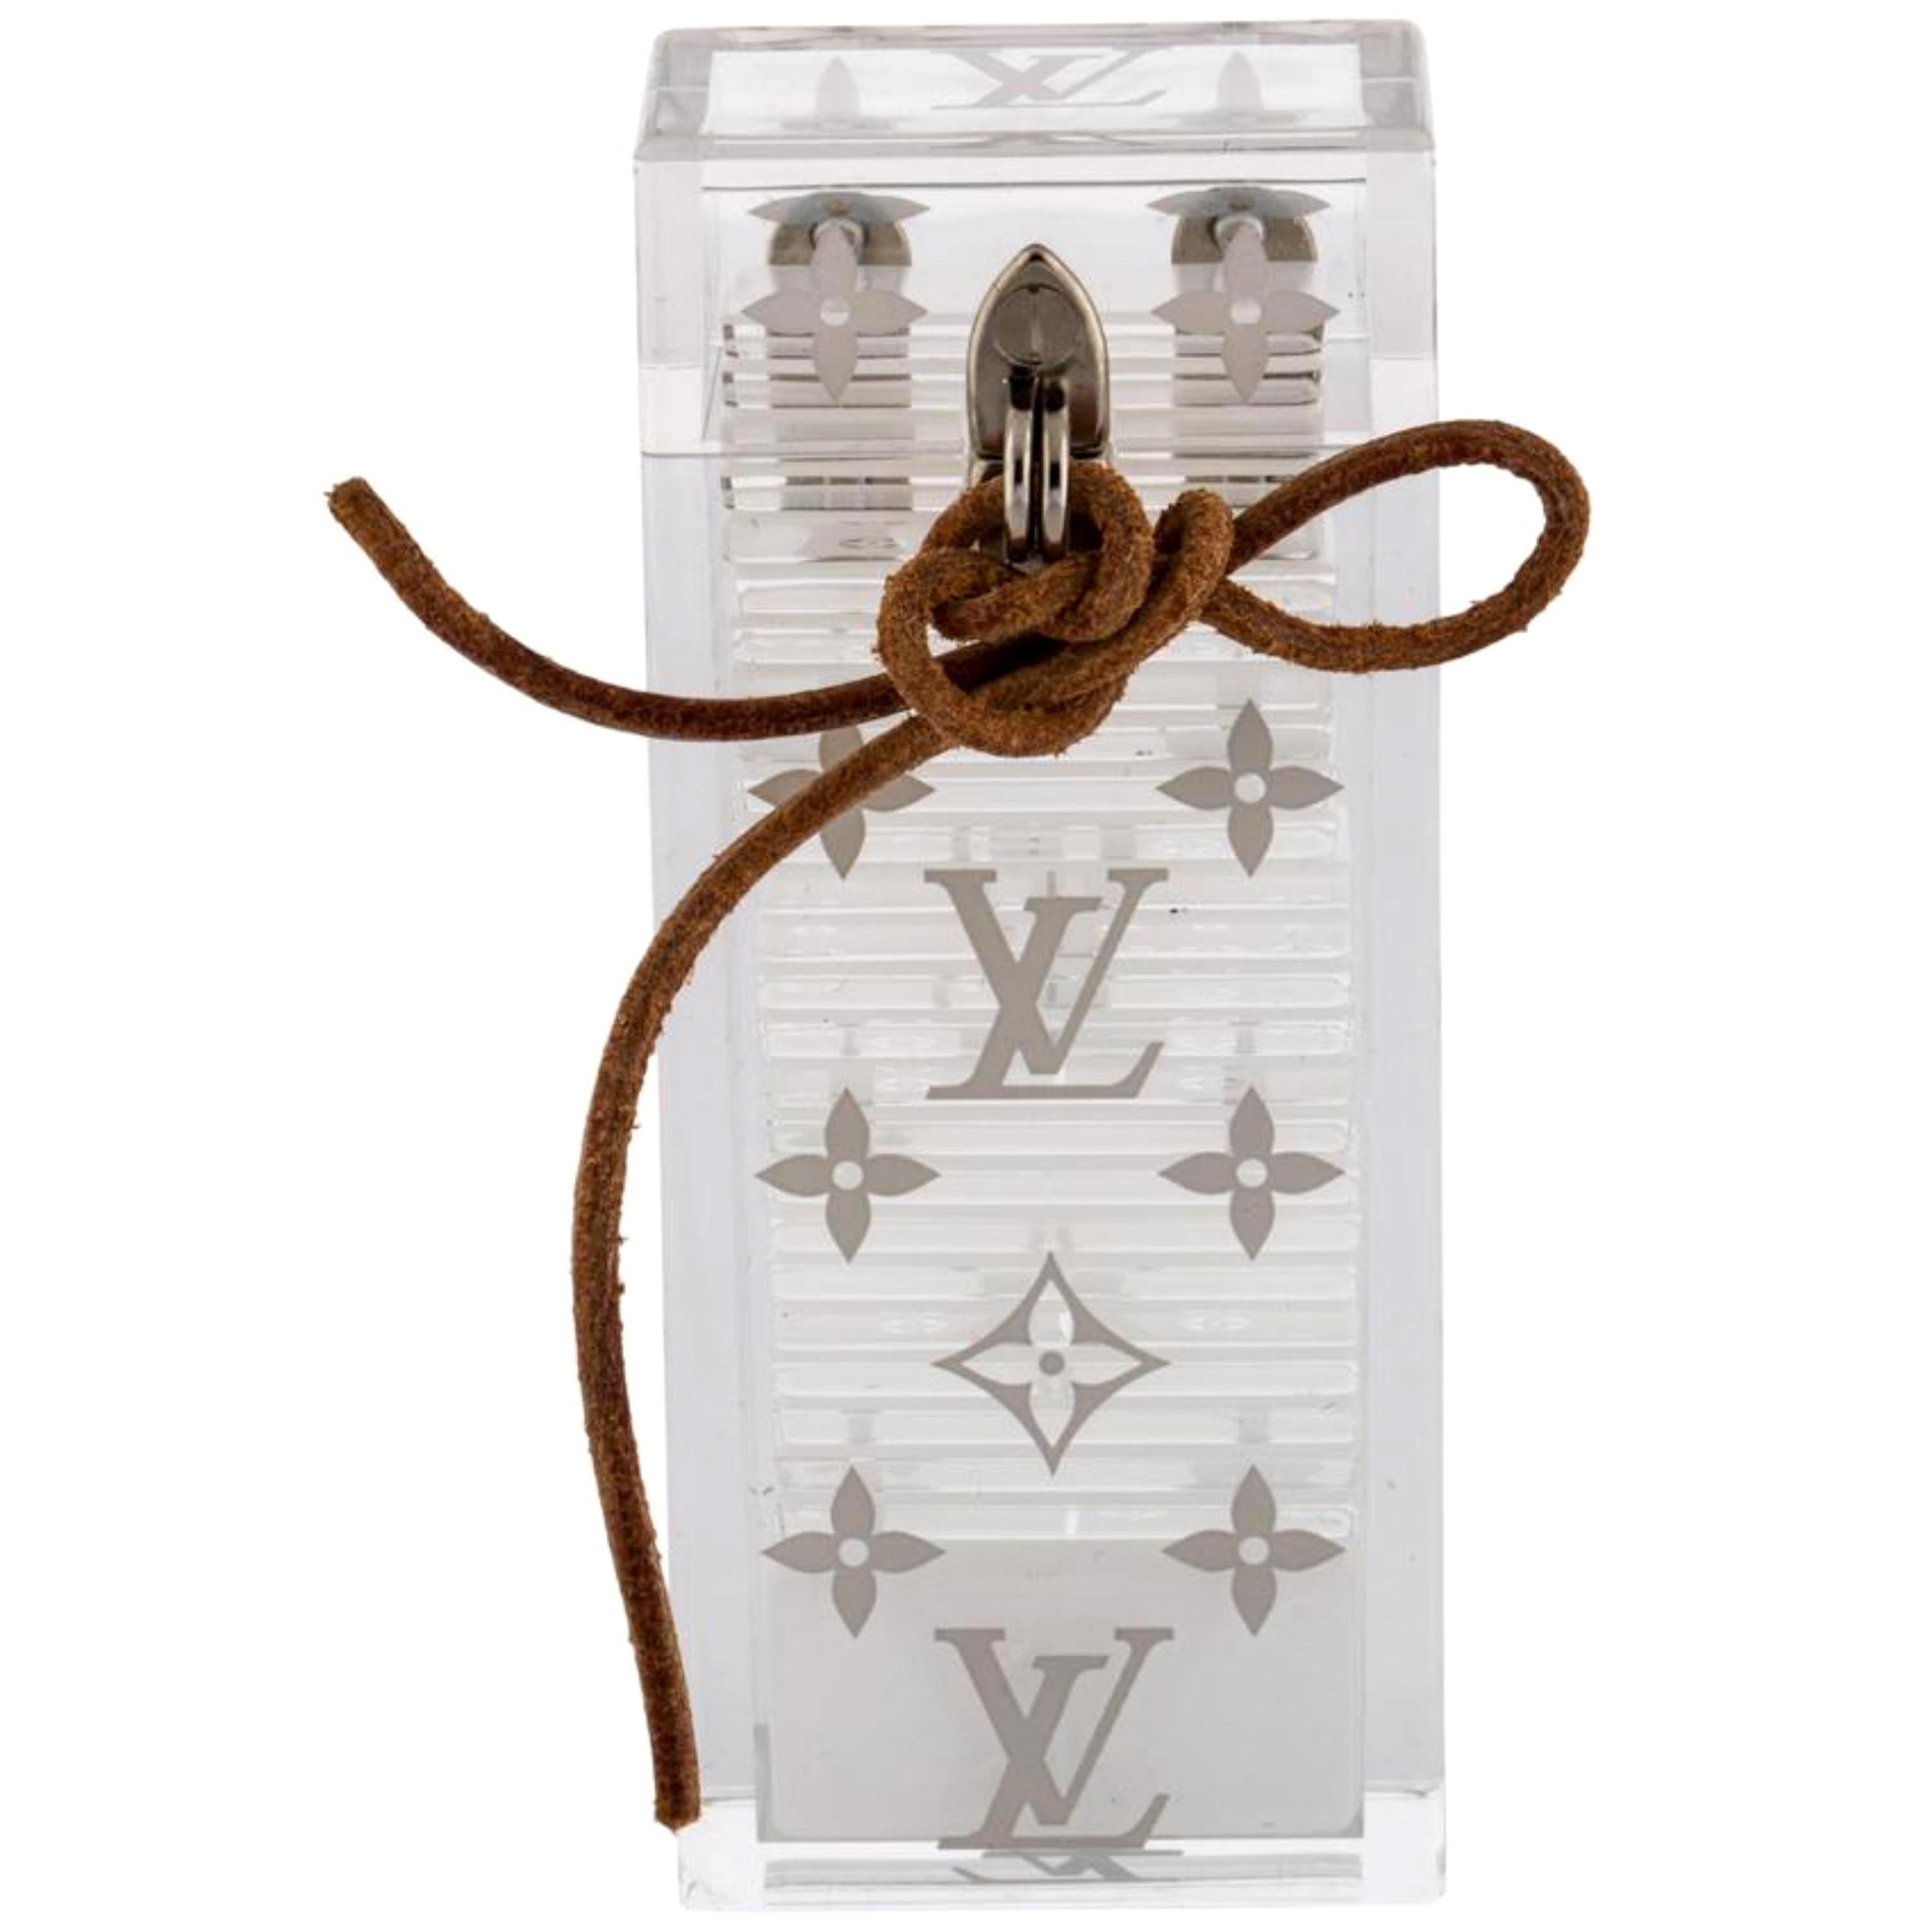 Louis Vuitton Clear (Ultra Rare) Monogram Dominoes Case with Domino Set 234035 For Sale